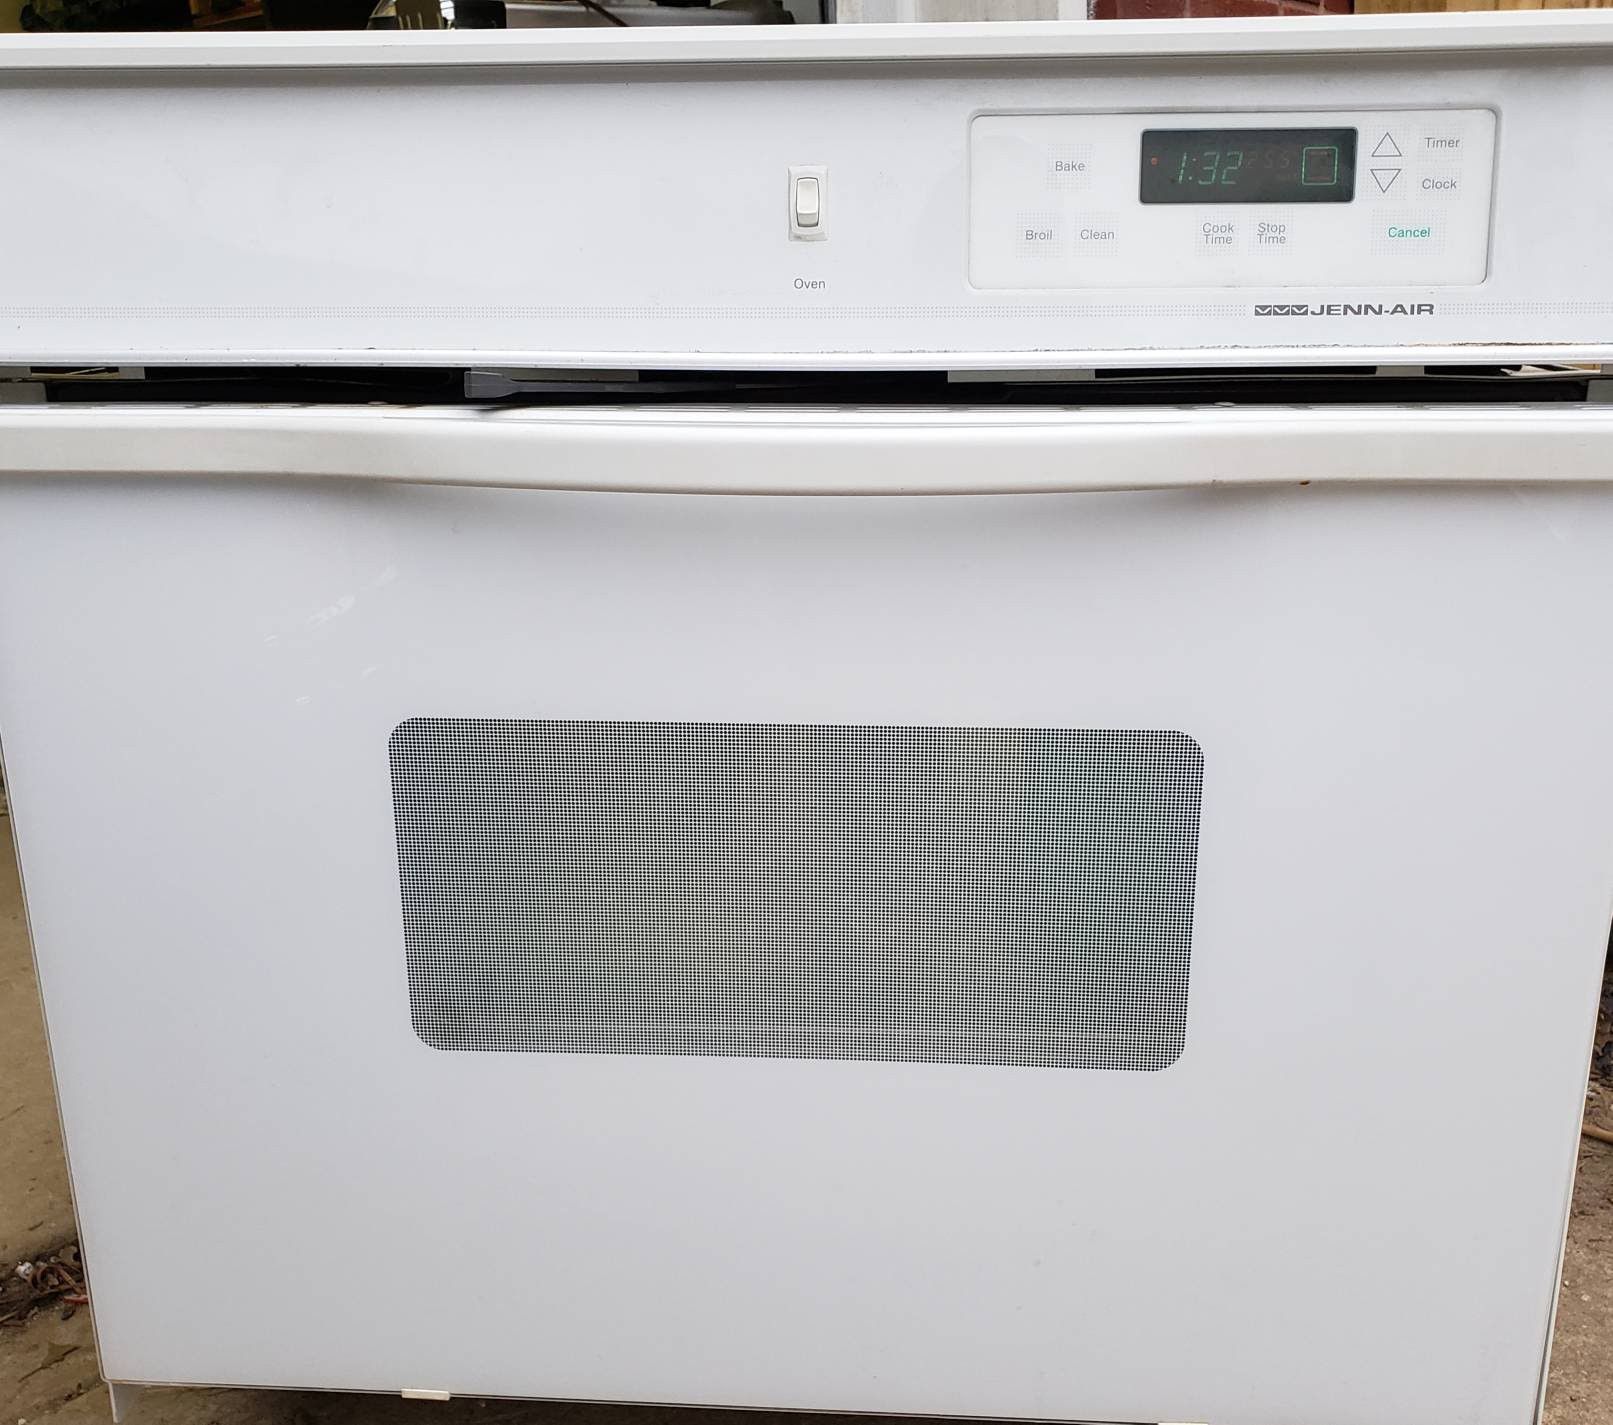 Bella Toaster Oven for Sale in Cumming, GA - OfferUp